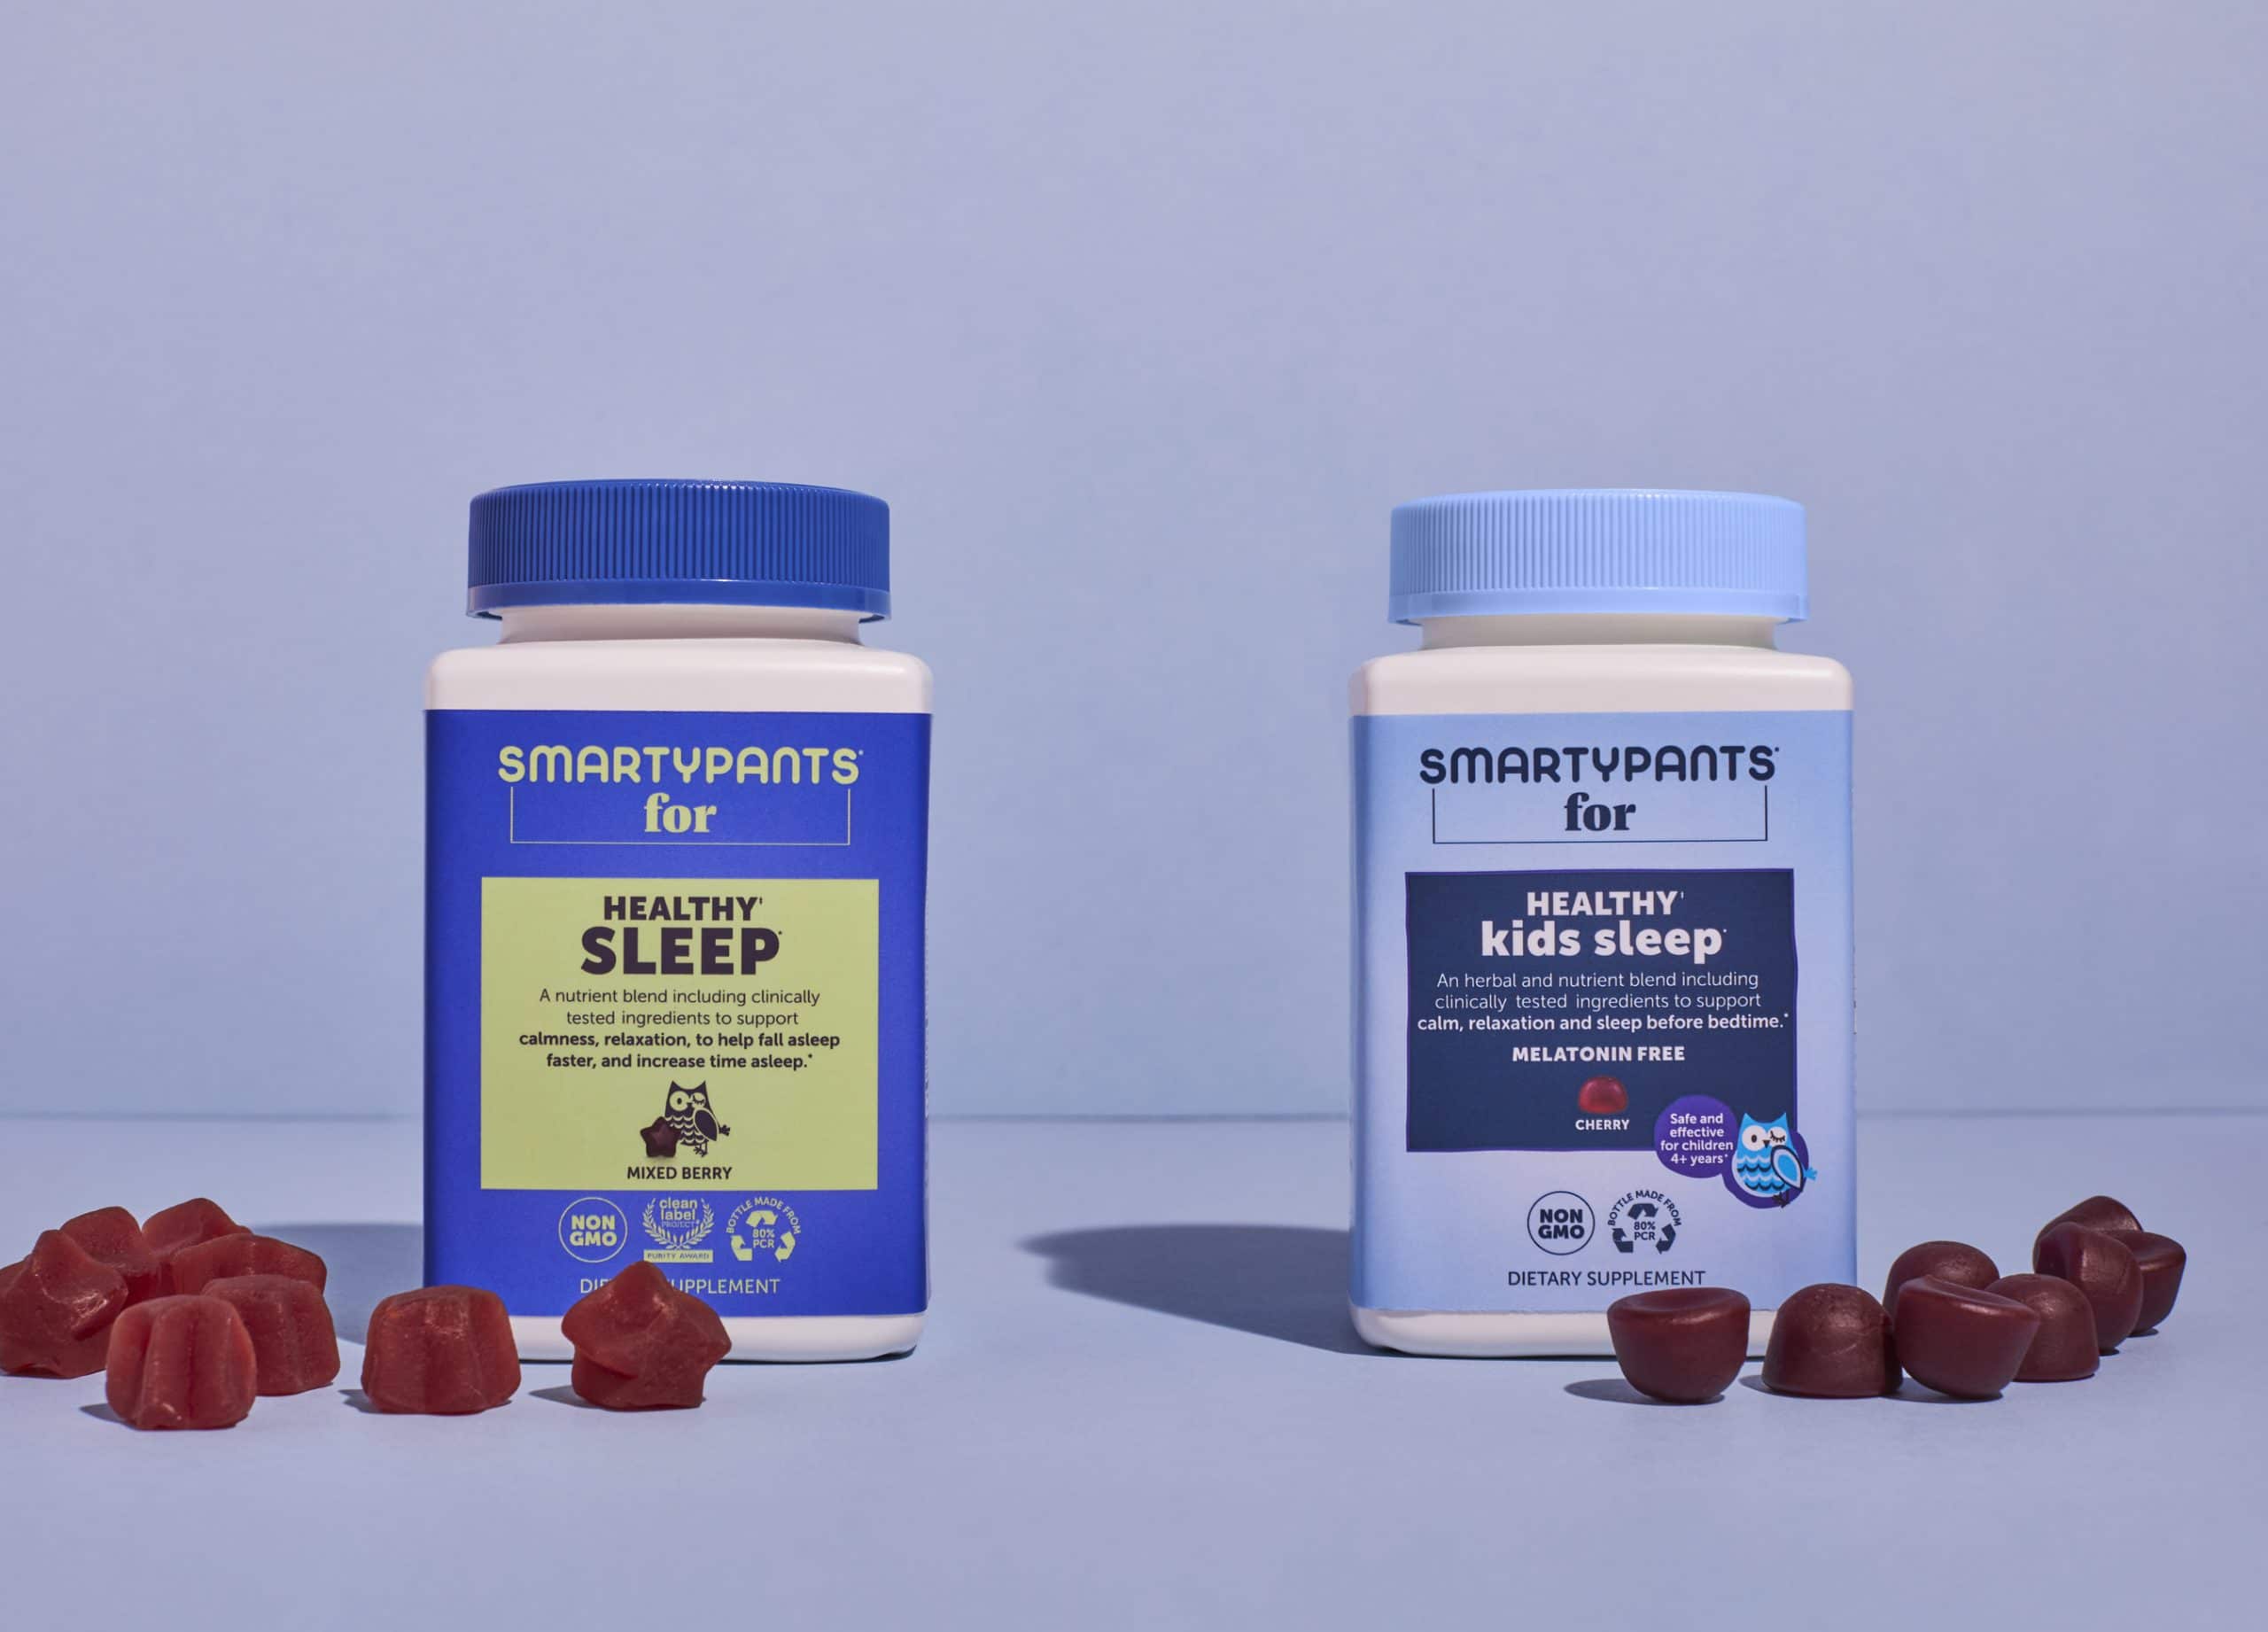 Eco-Packaged Multivitamin Maker SmartyPants Expands